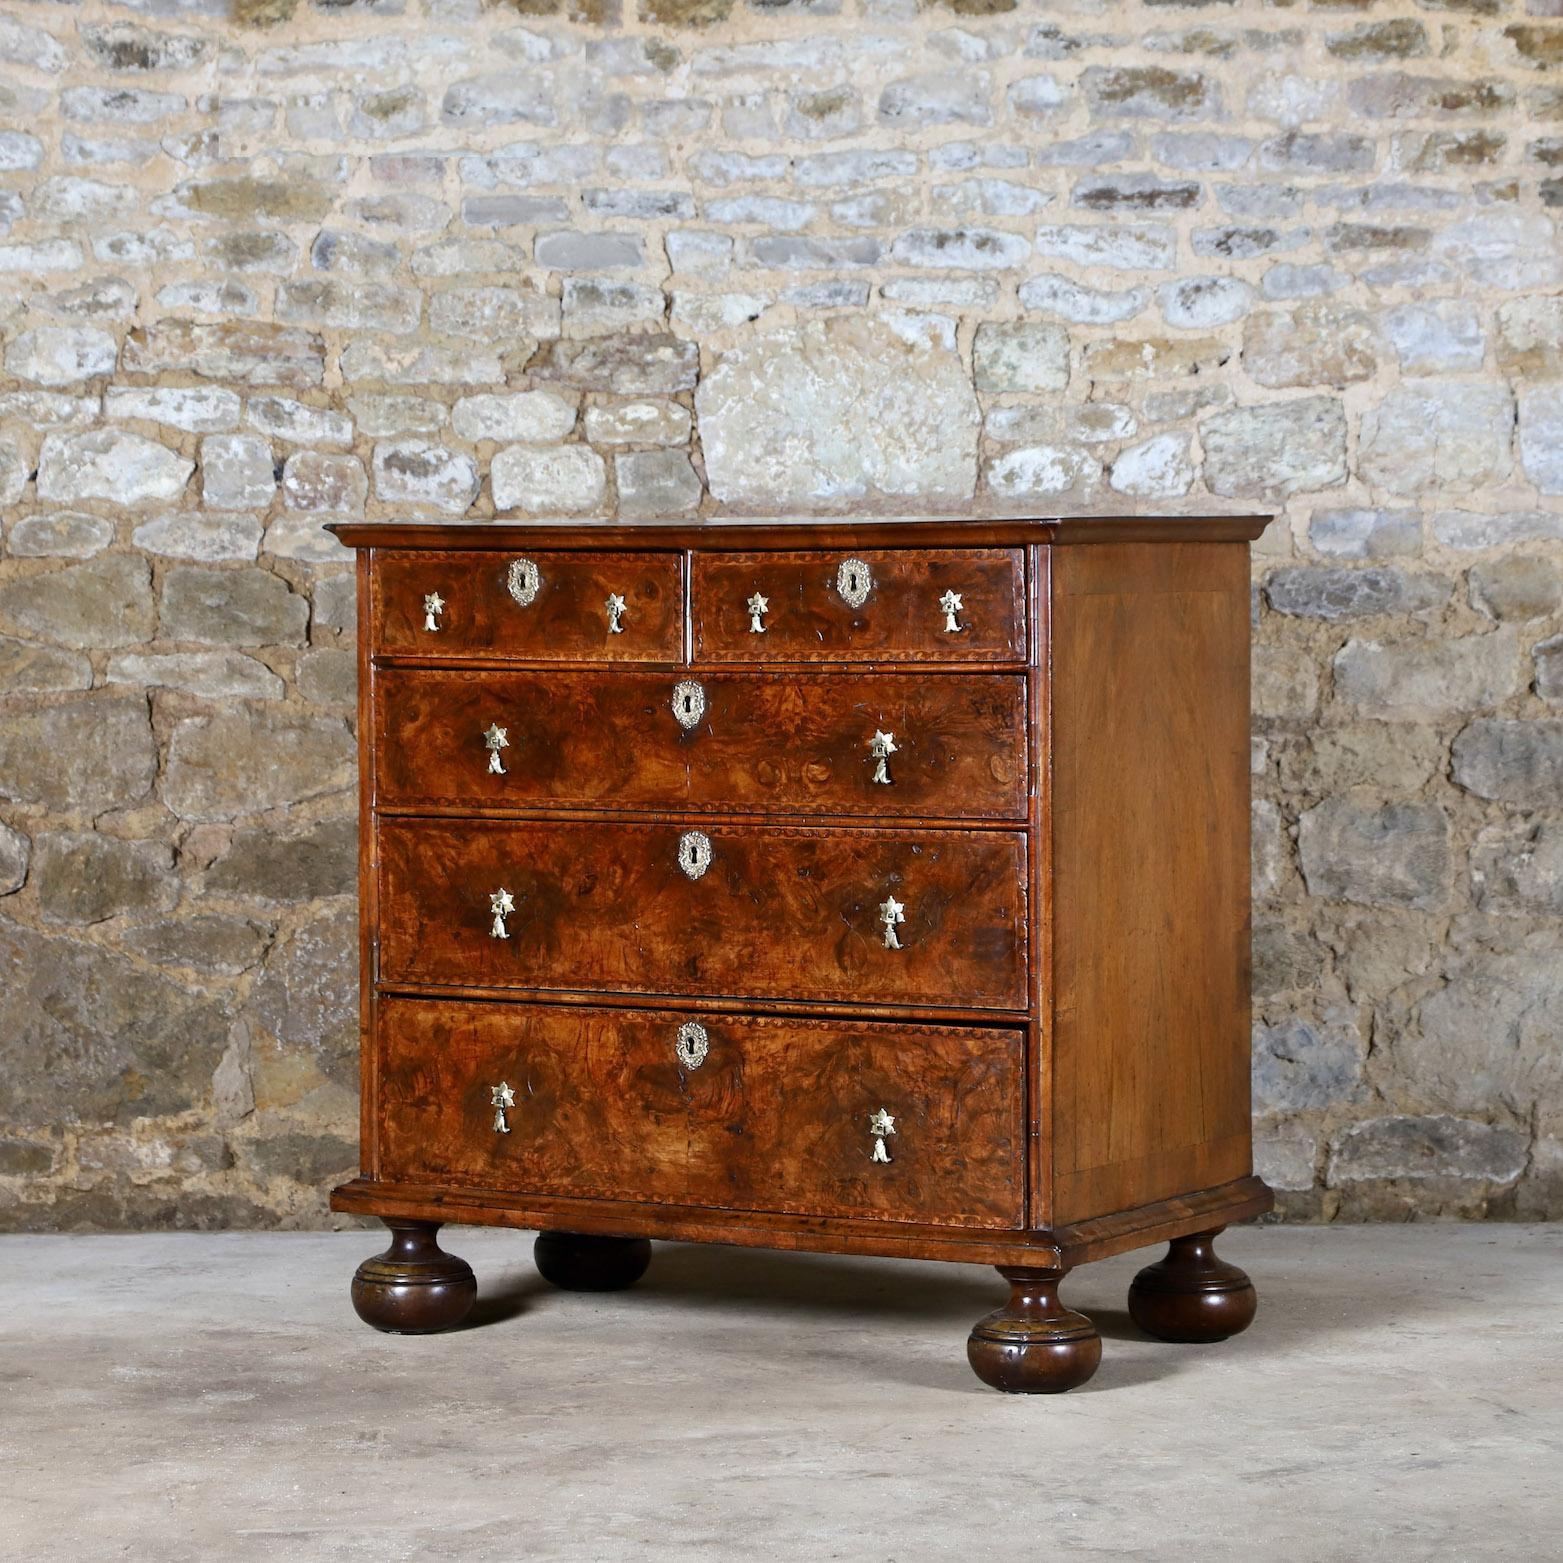 Early 18th Century William & Mary Chest